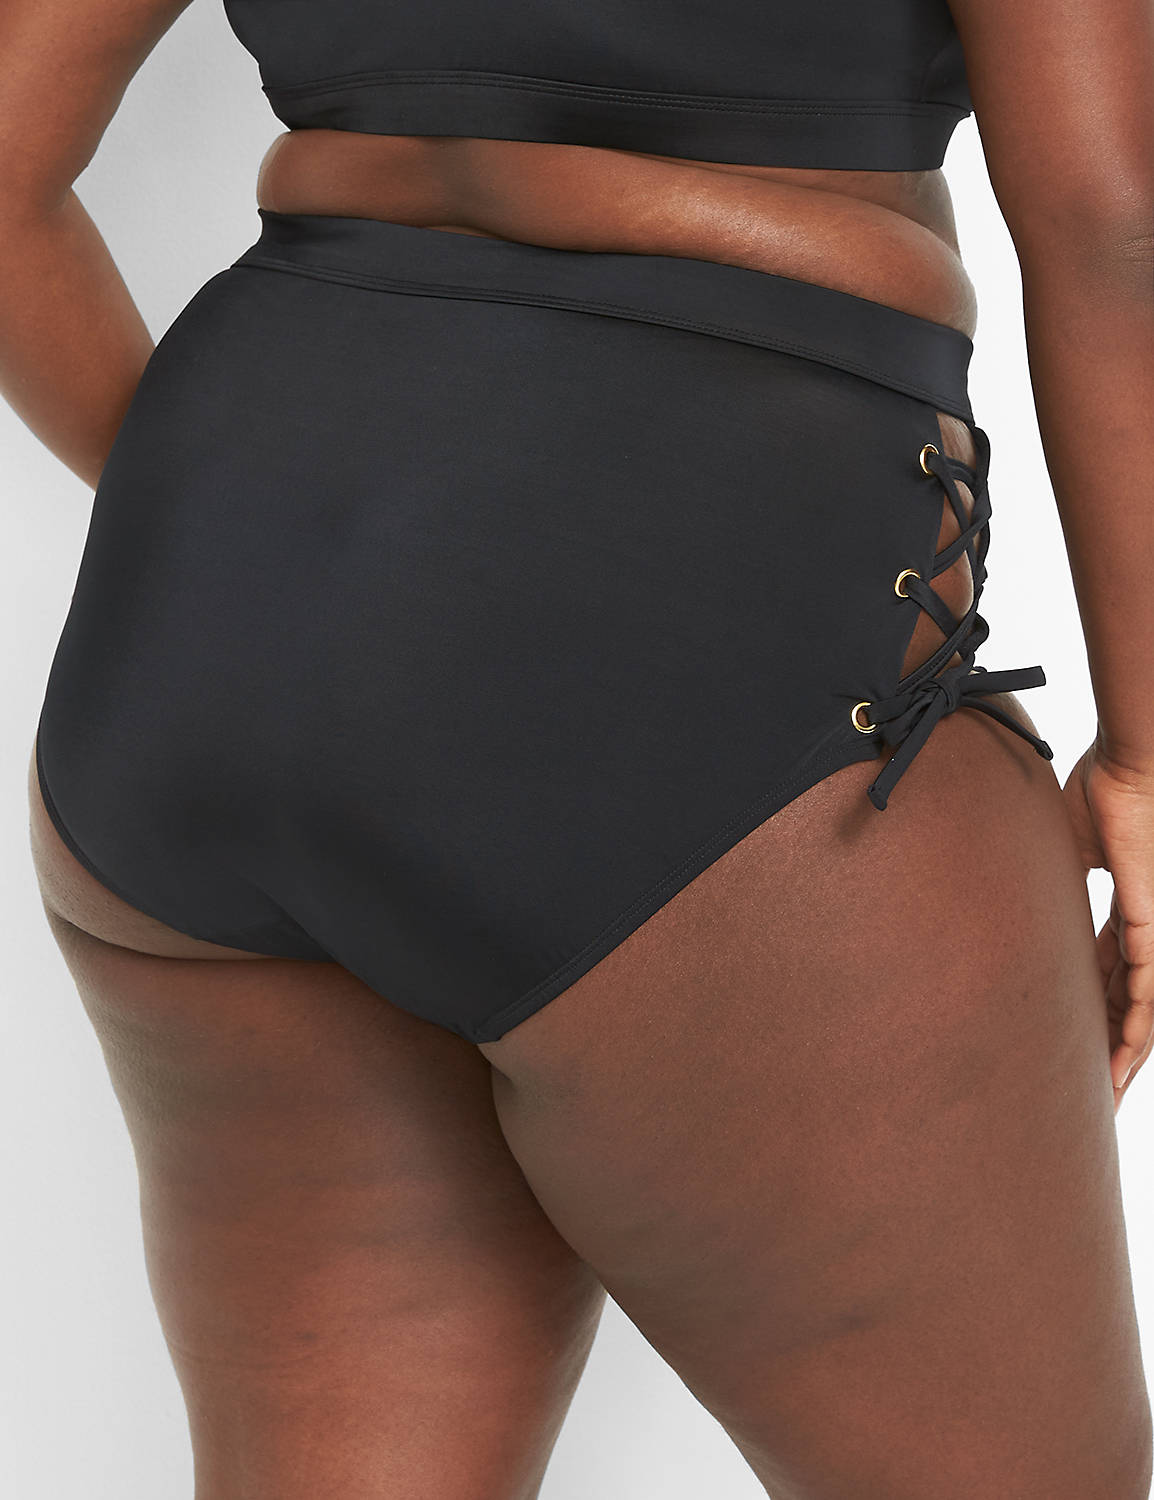 Lace Up Swim Brief 1121698 Product Image 2